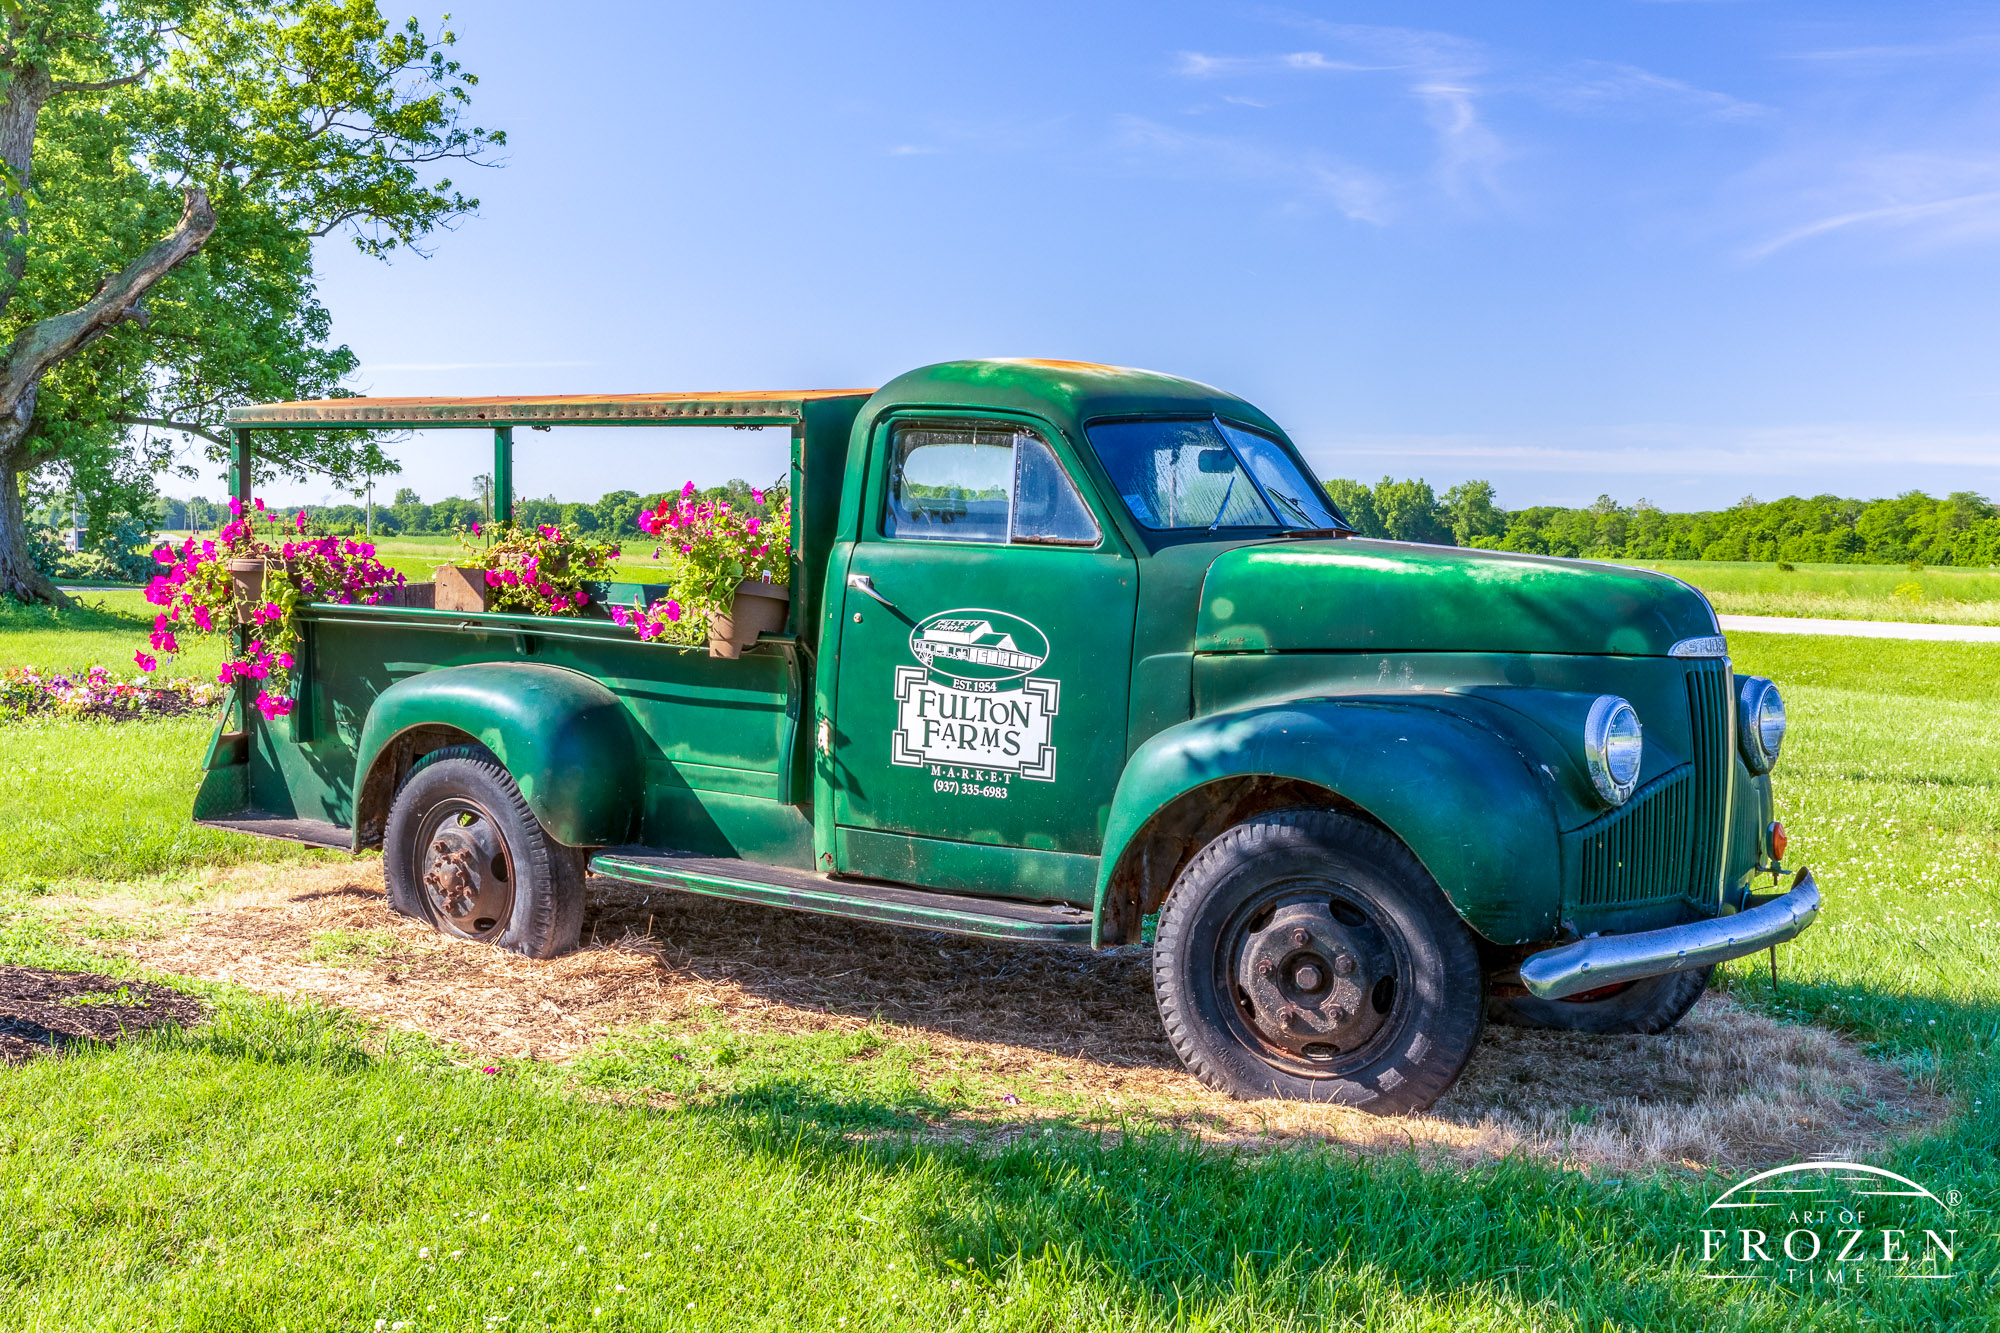 Sitting outside Fulton Farms lies an old green Studebaker pick up truck whose truck bed holds pots of pink flowers as the truck takes in the morning sun